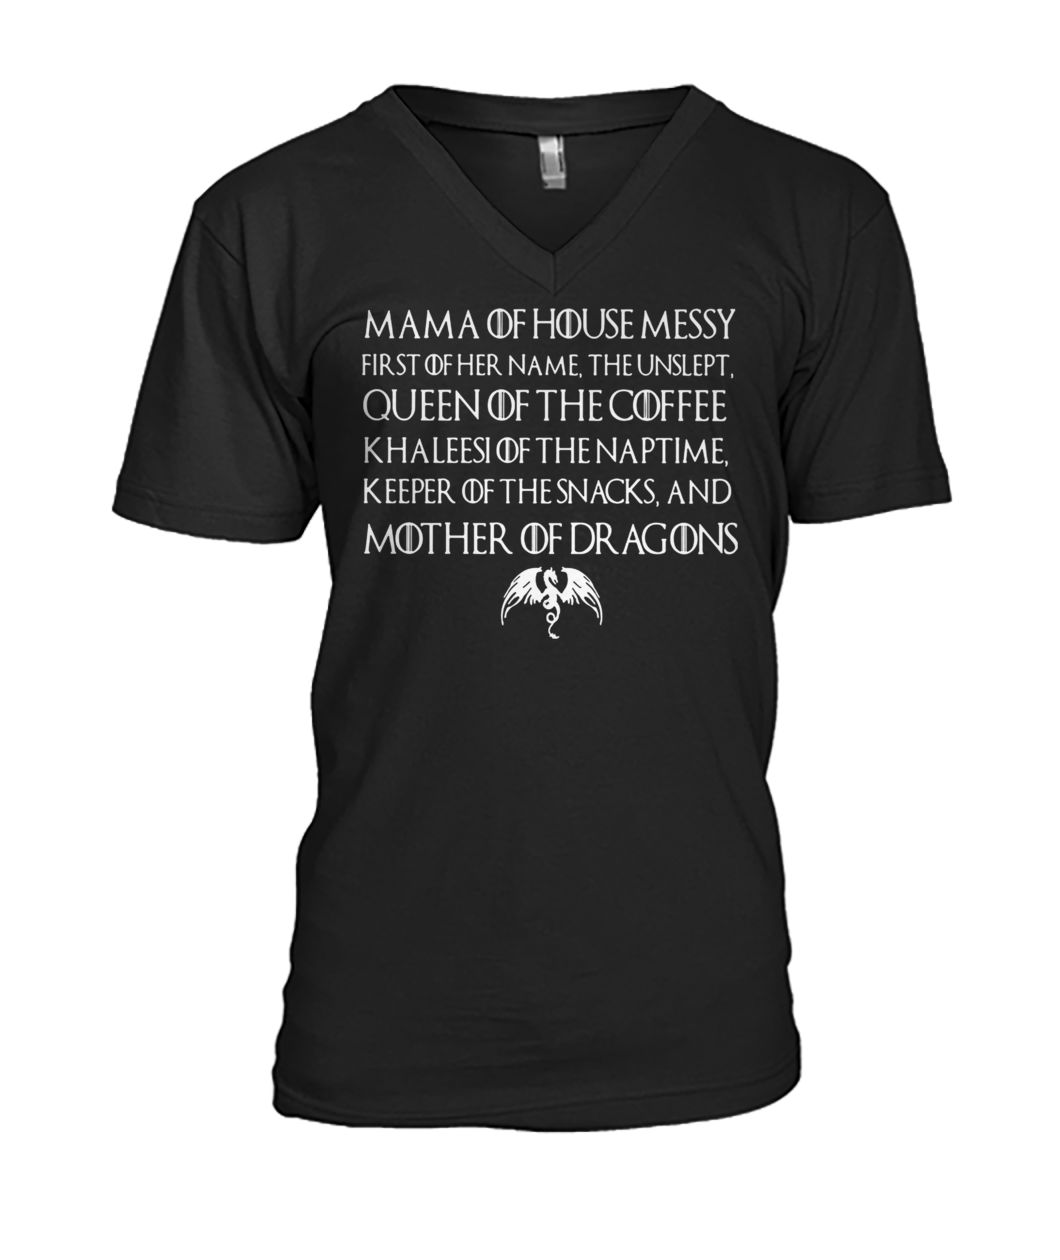 Game of thrones mama of house queen of the coffee khaleesi of the naptime mother of dragons mens v-neck